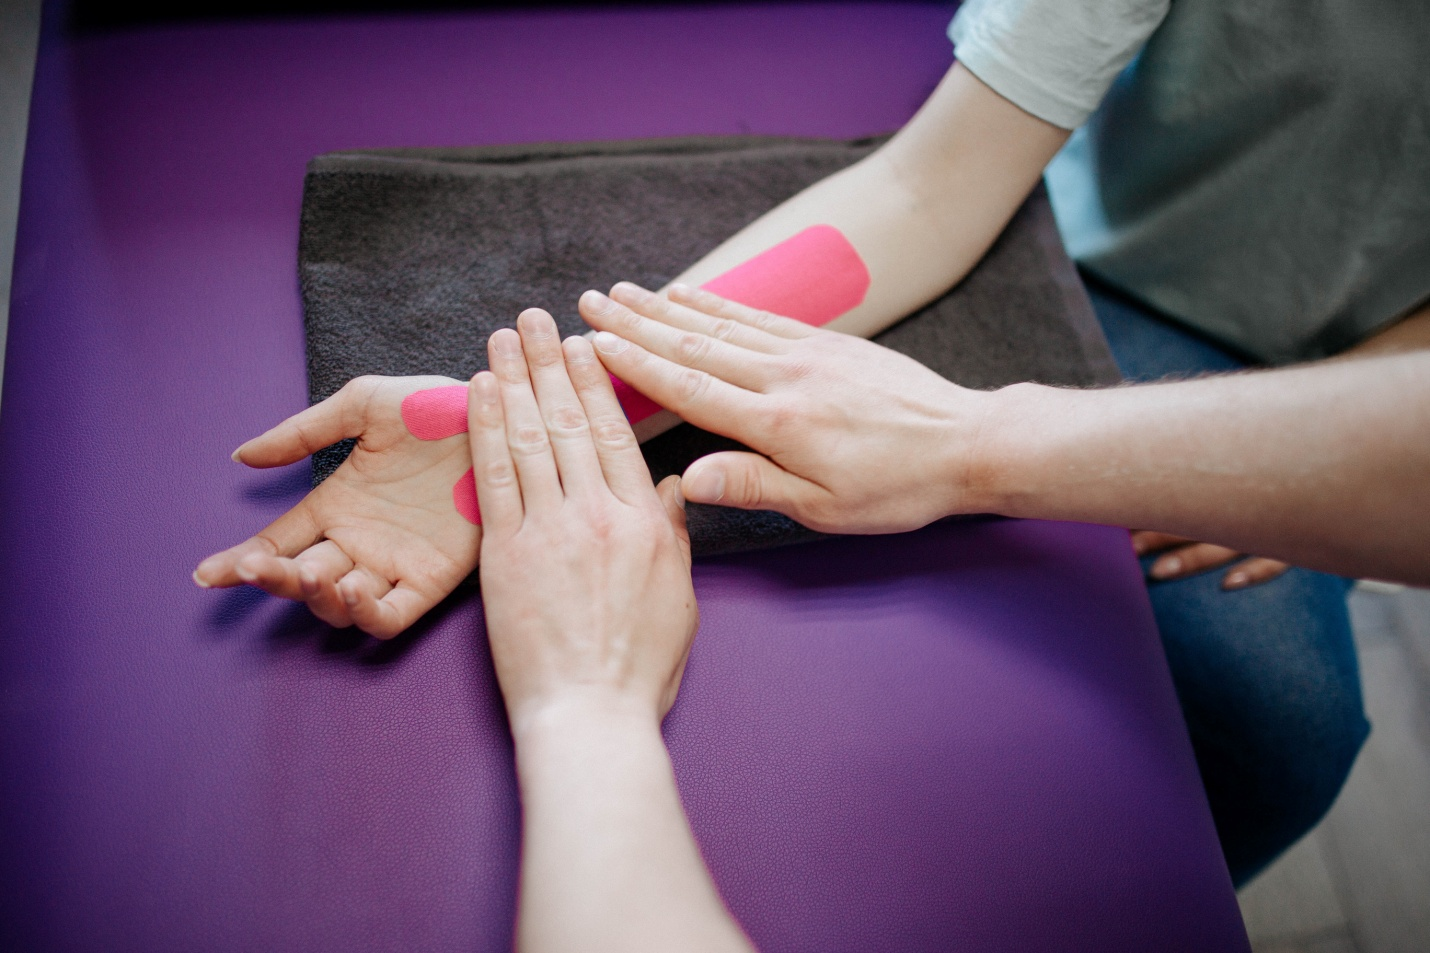 A hand therapist massage the forearm of a patient at the hand therapy clinic in NJ